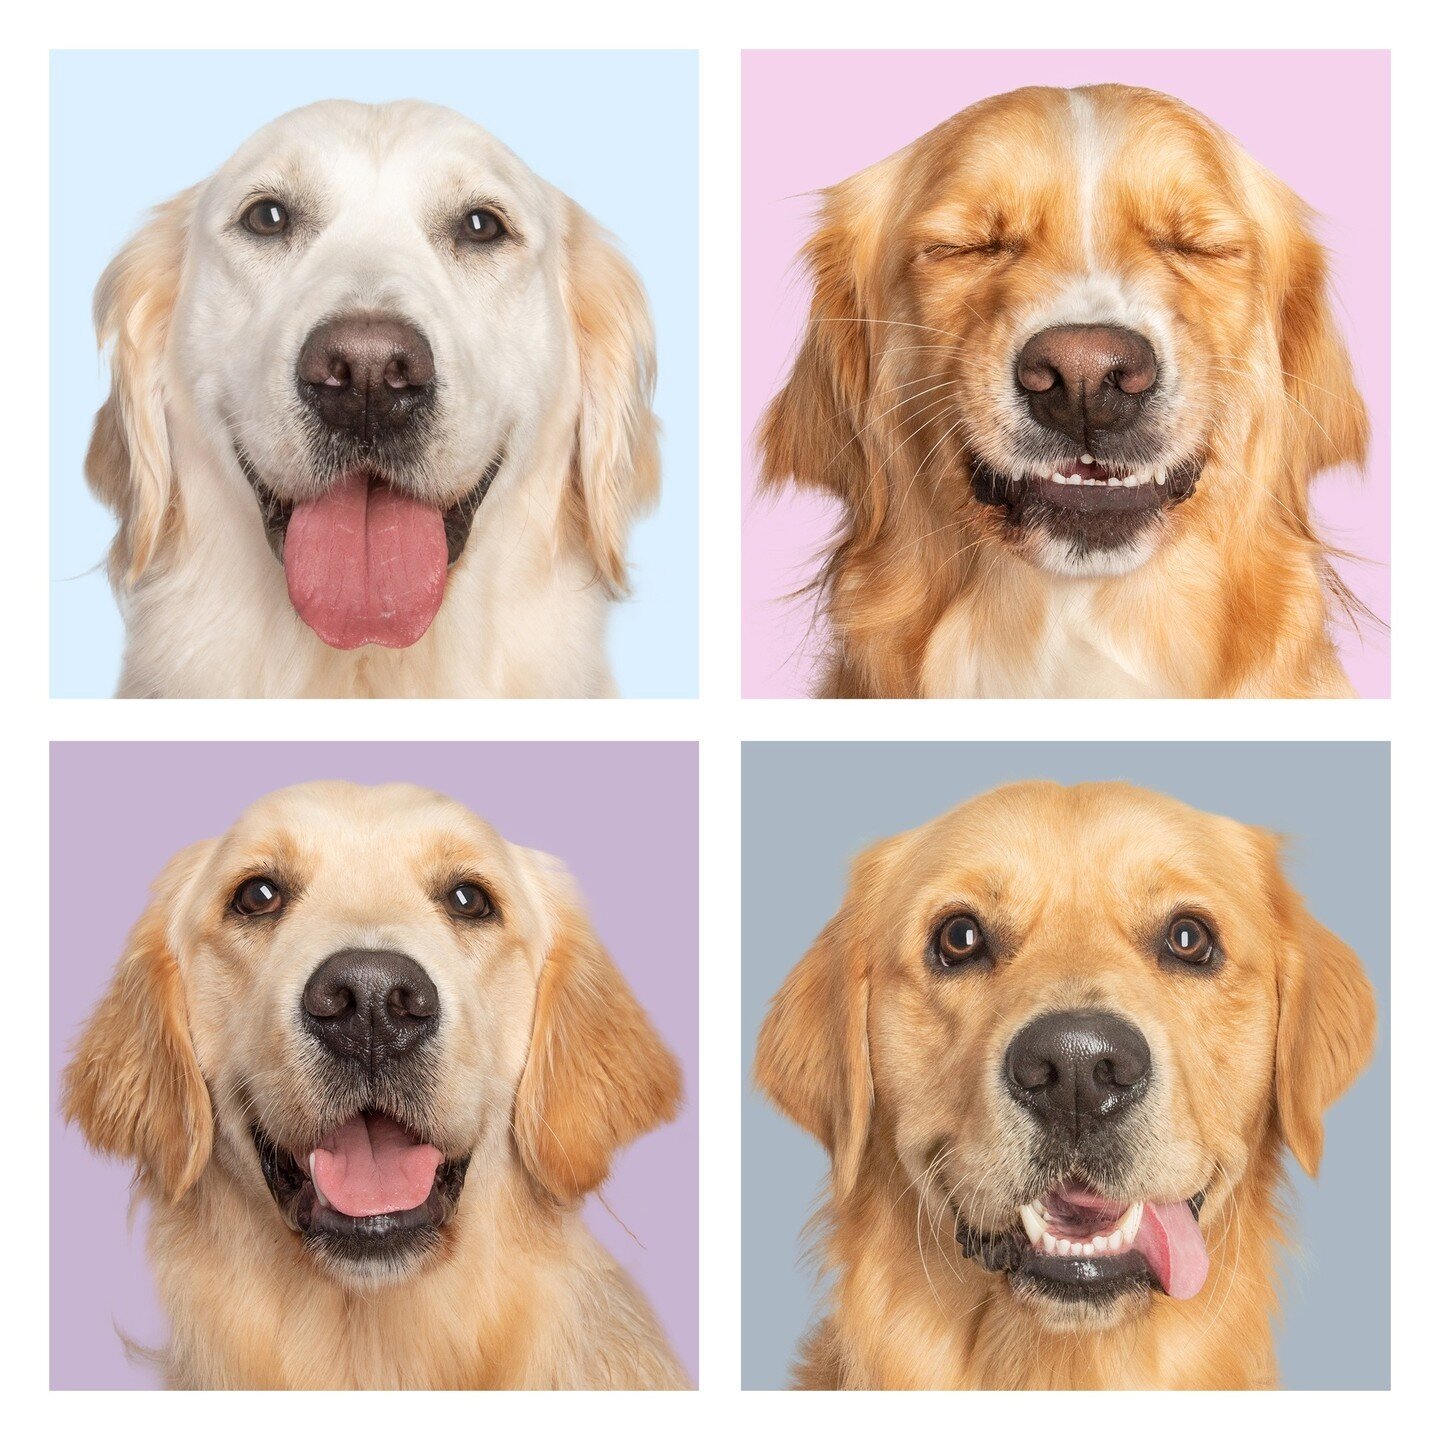 WANTED: GOLDEN RETRIEVERS &amp; Crosses!⁠
Get your Golden Retriever or Cross a $20 Pet Photography Session &amp; at the same time help to raise vital funds for the Animal Welfare League of SA. All that is needed to register is a Golden Retriever (oth